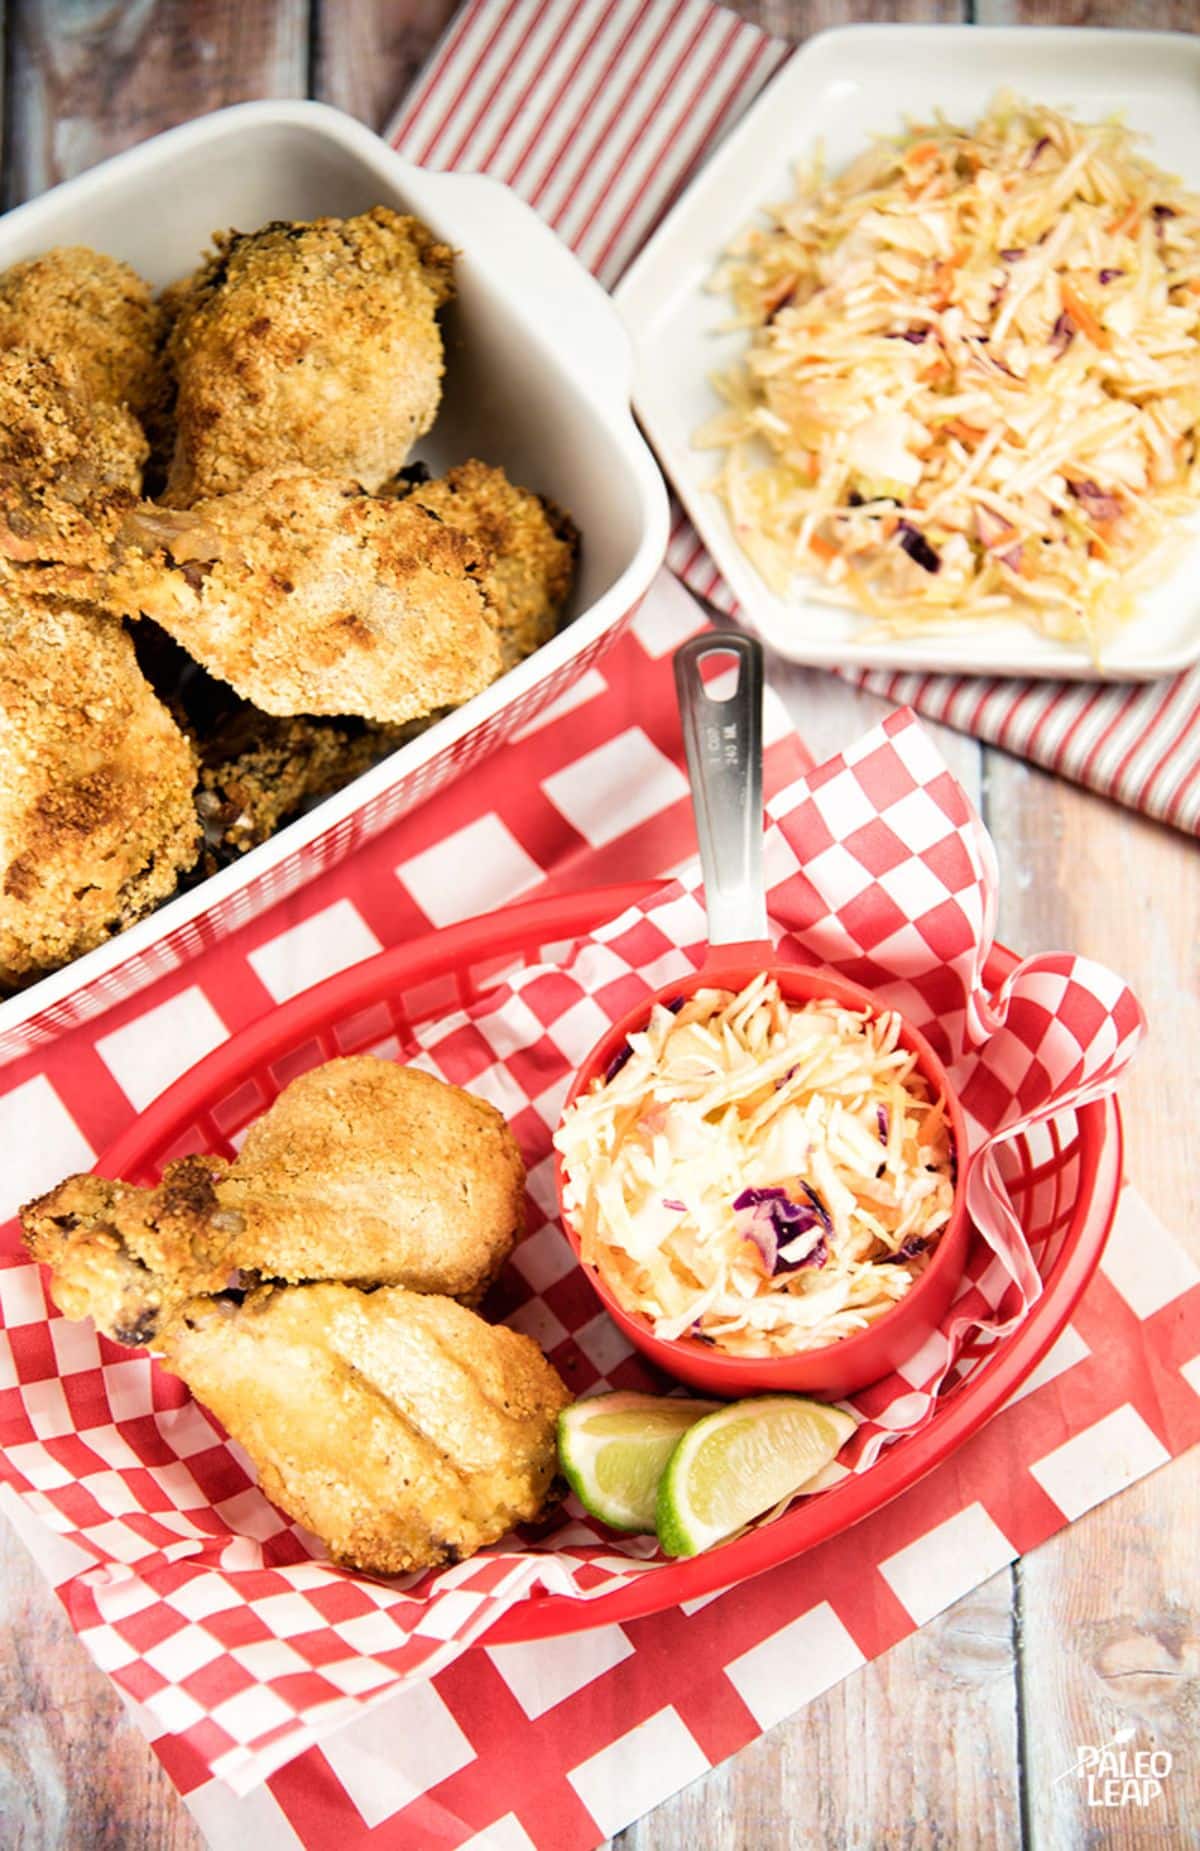 Fried Chicken With Spicy Cumin Coleslaw